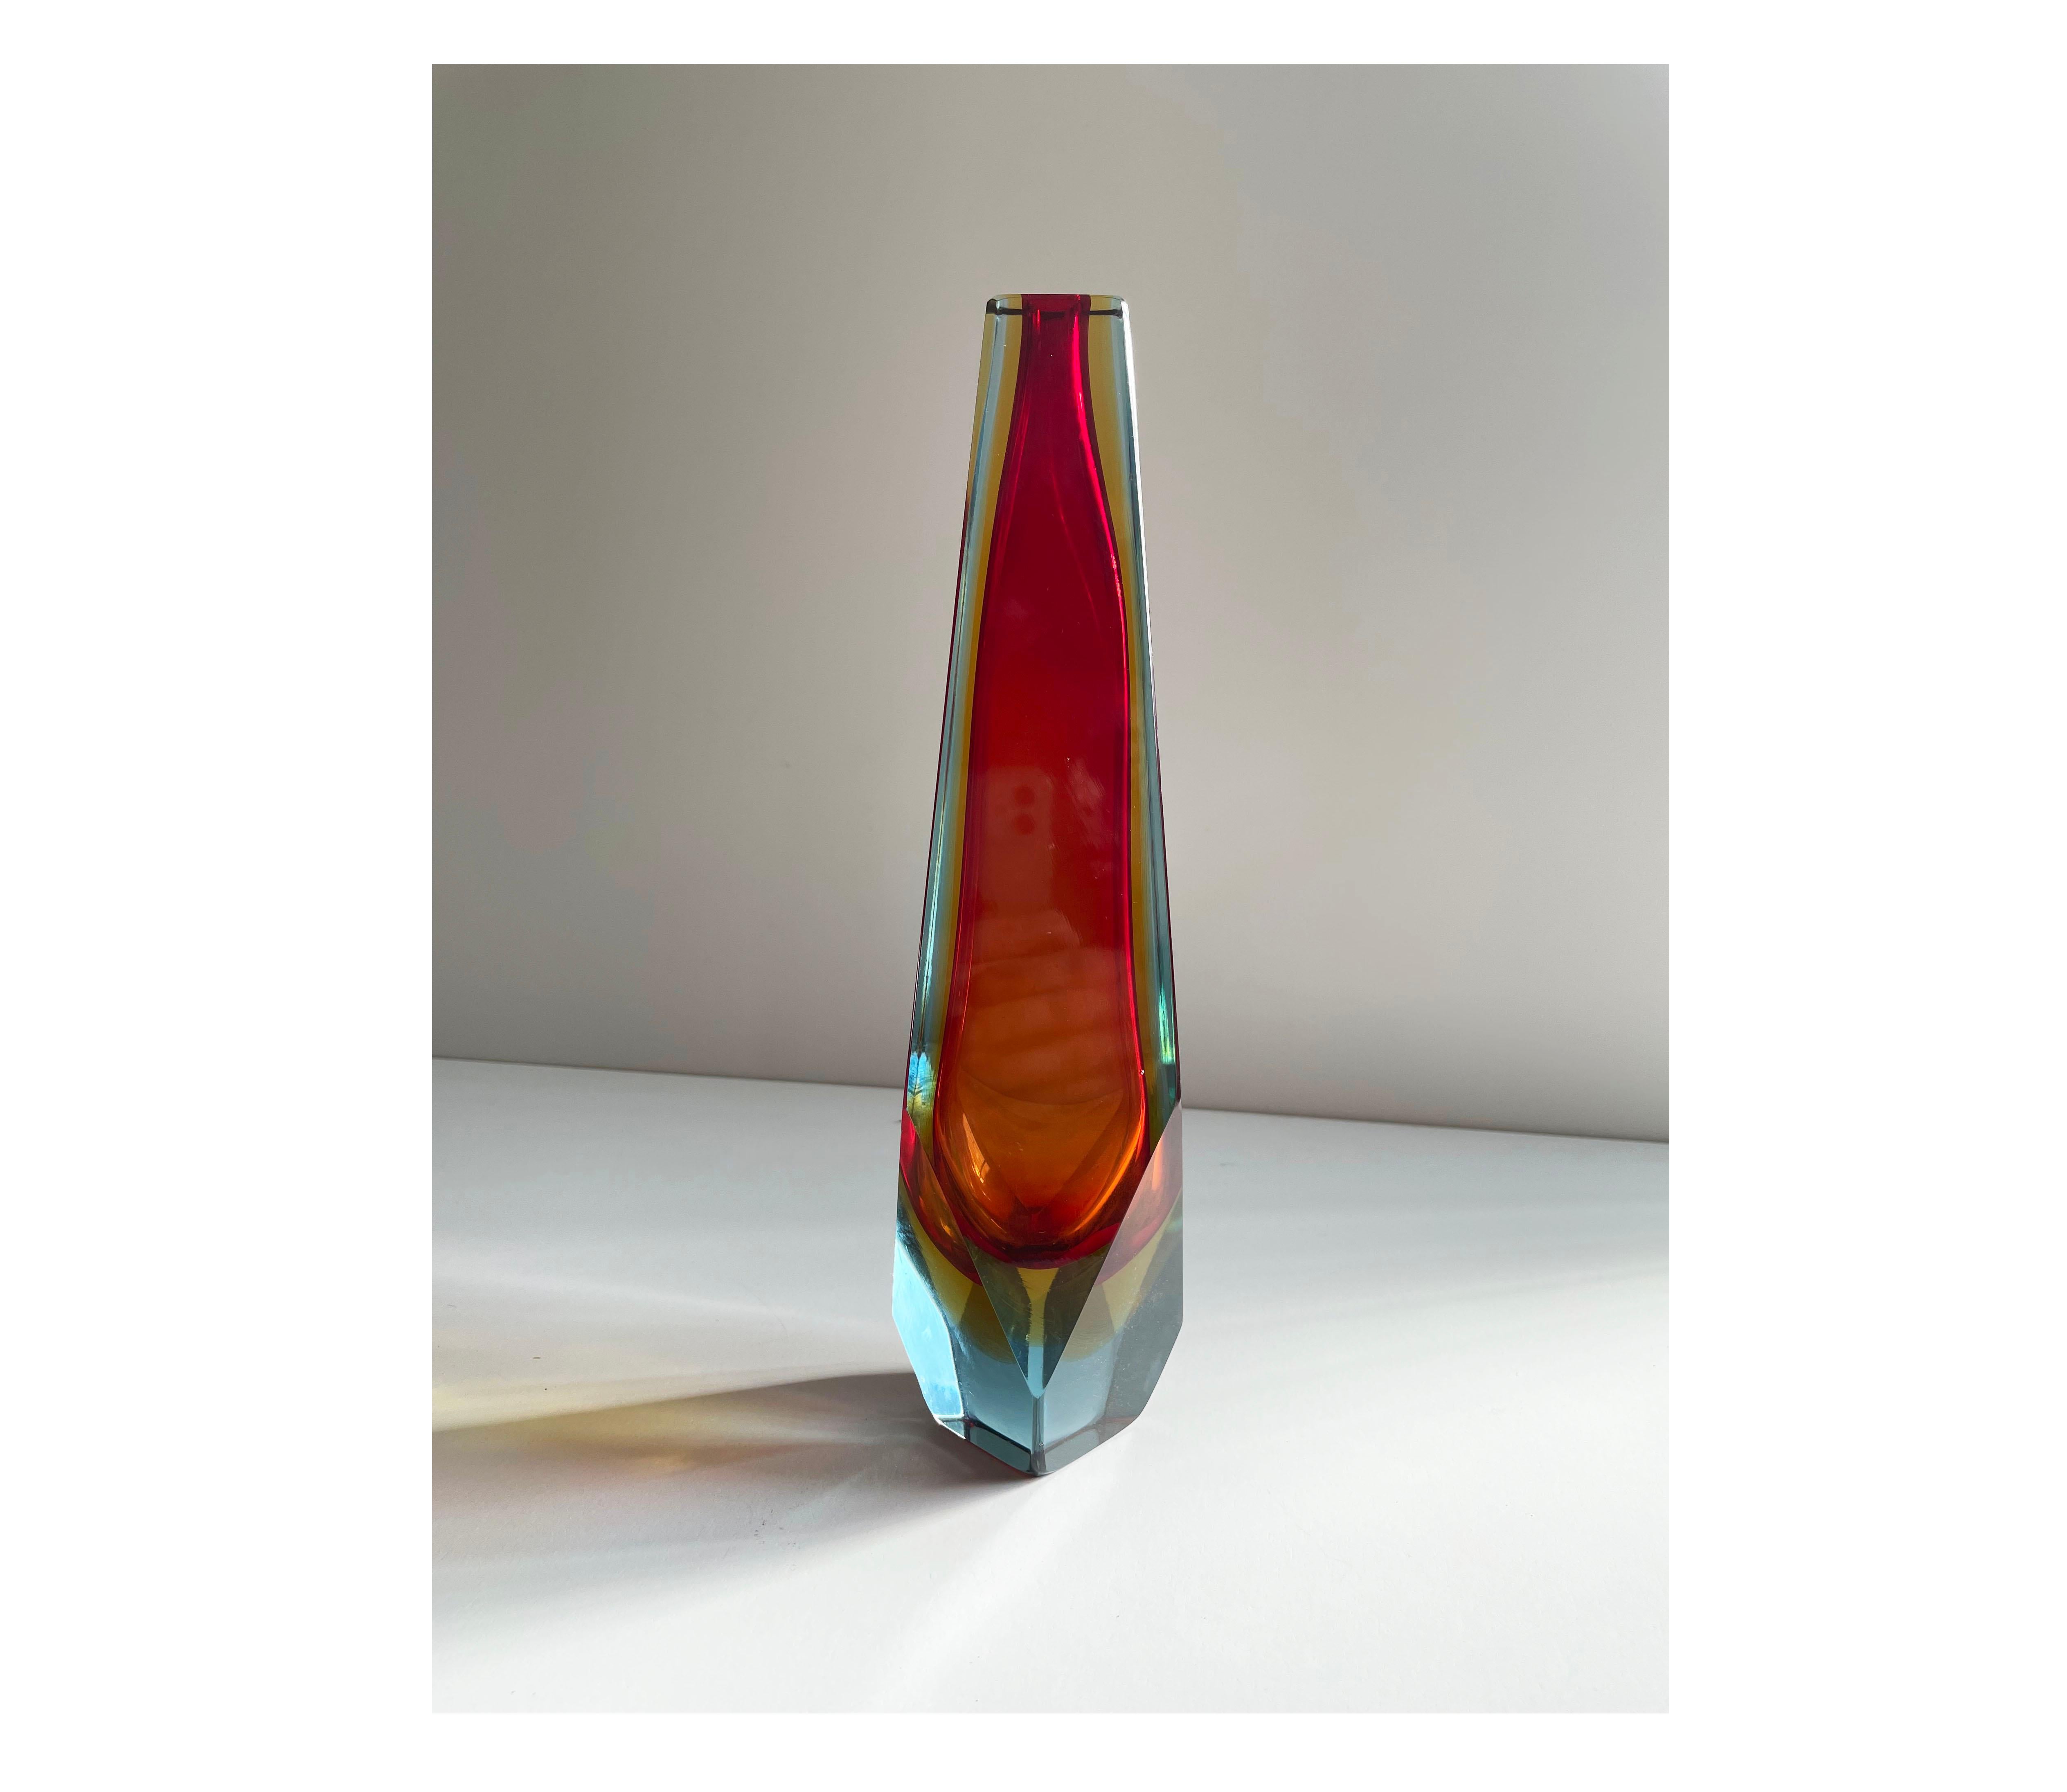 Vintage mid-century Italian sommerso faceted vase, Murano glass 1960s.
Manufactured by Alessandro Mandruzzato
Model San Marco

